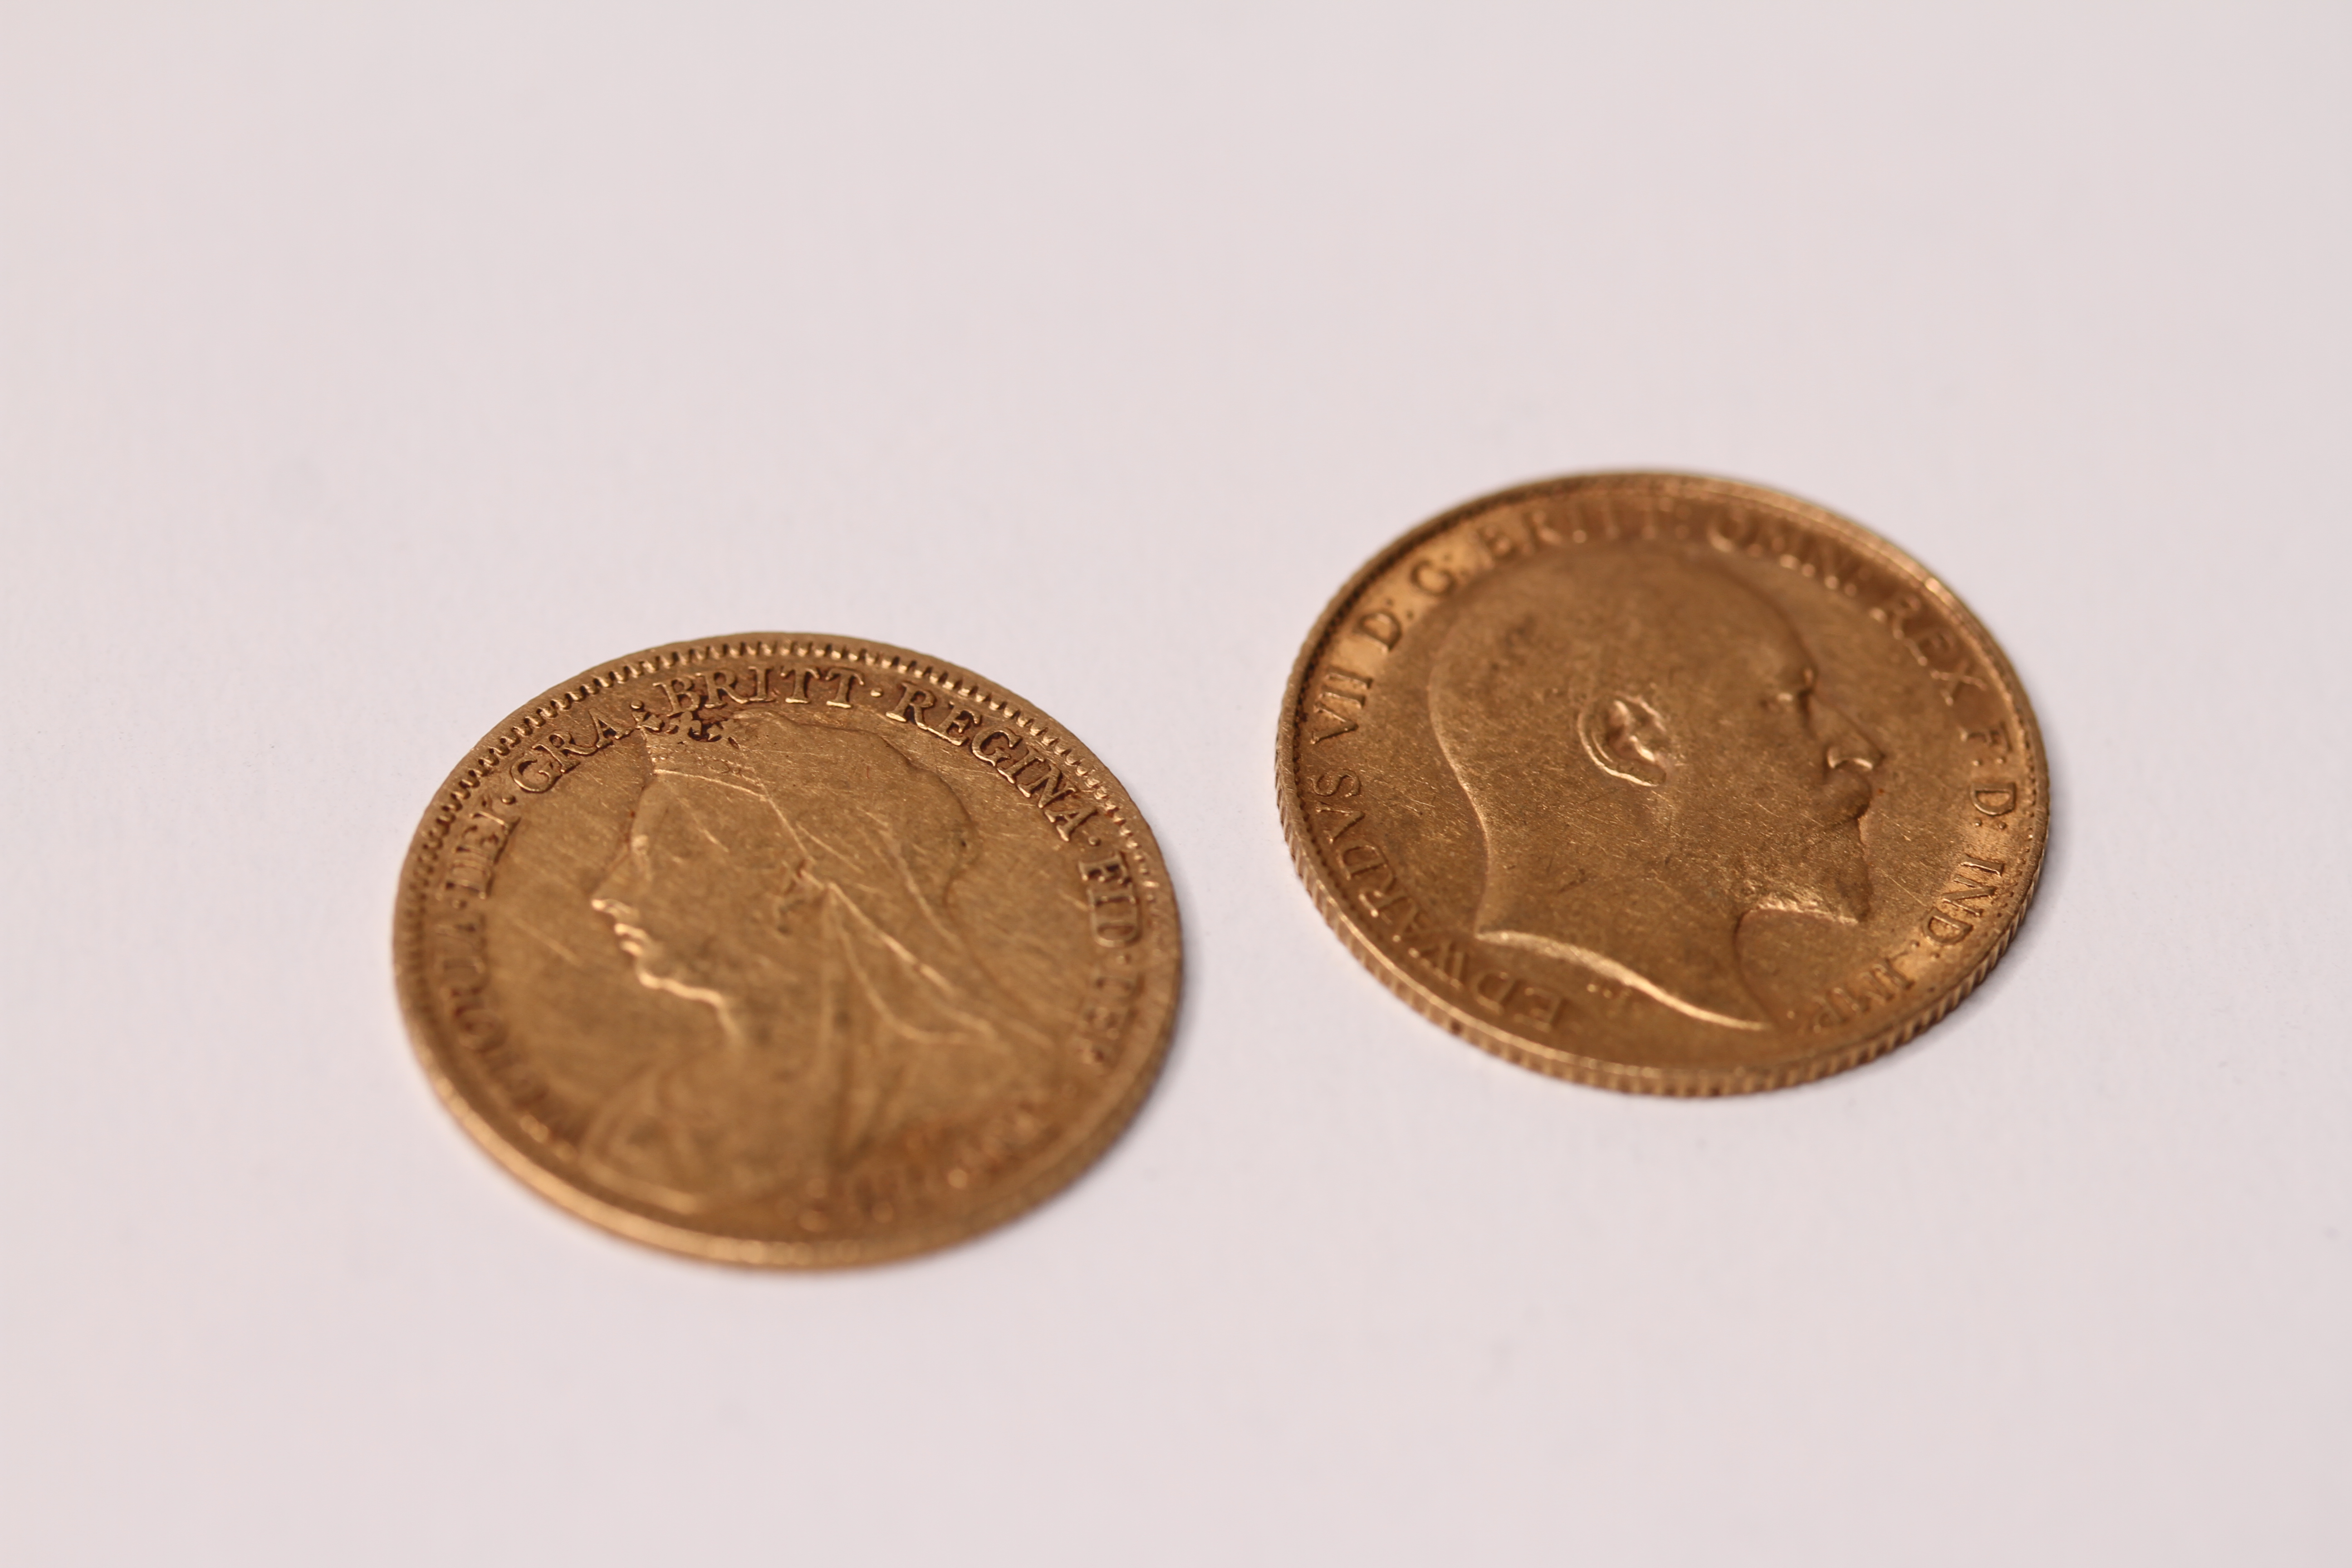 *TO BE SOLD WITHOUT RESERVE*Two gold half sovereigns dated 1901 and 1906. - Image 2 of 2